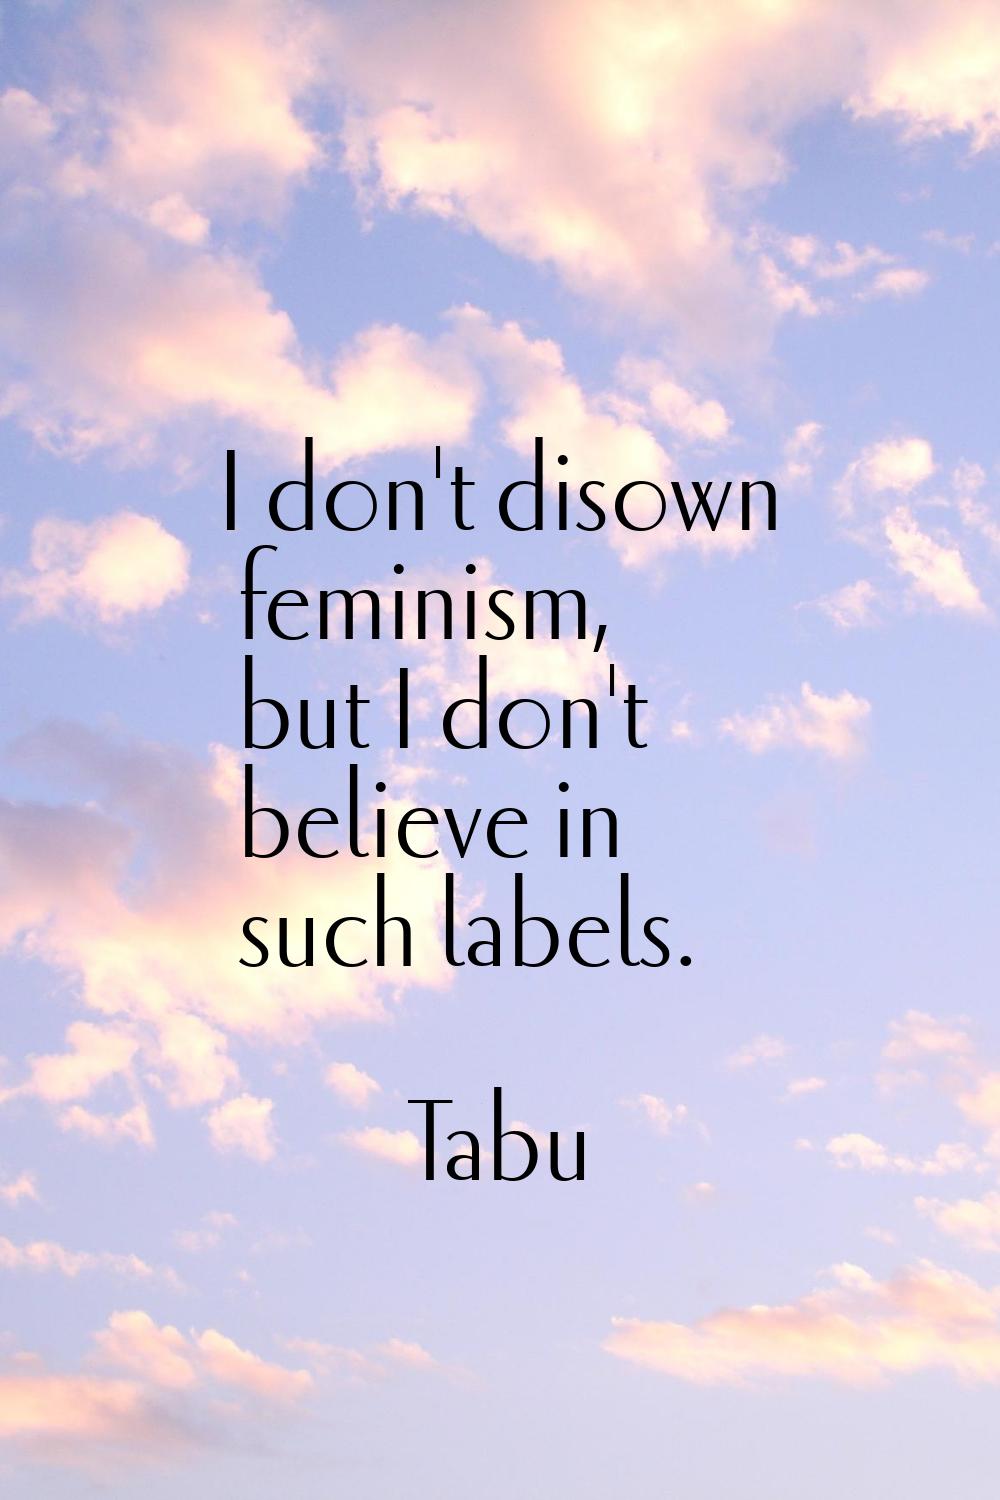 I don't disown feminism, but I don't believe in such labels.